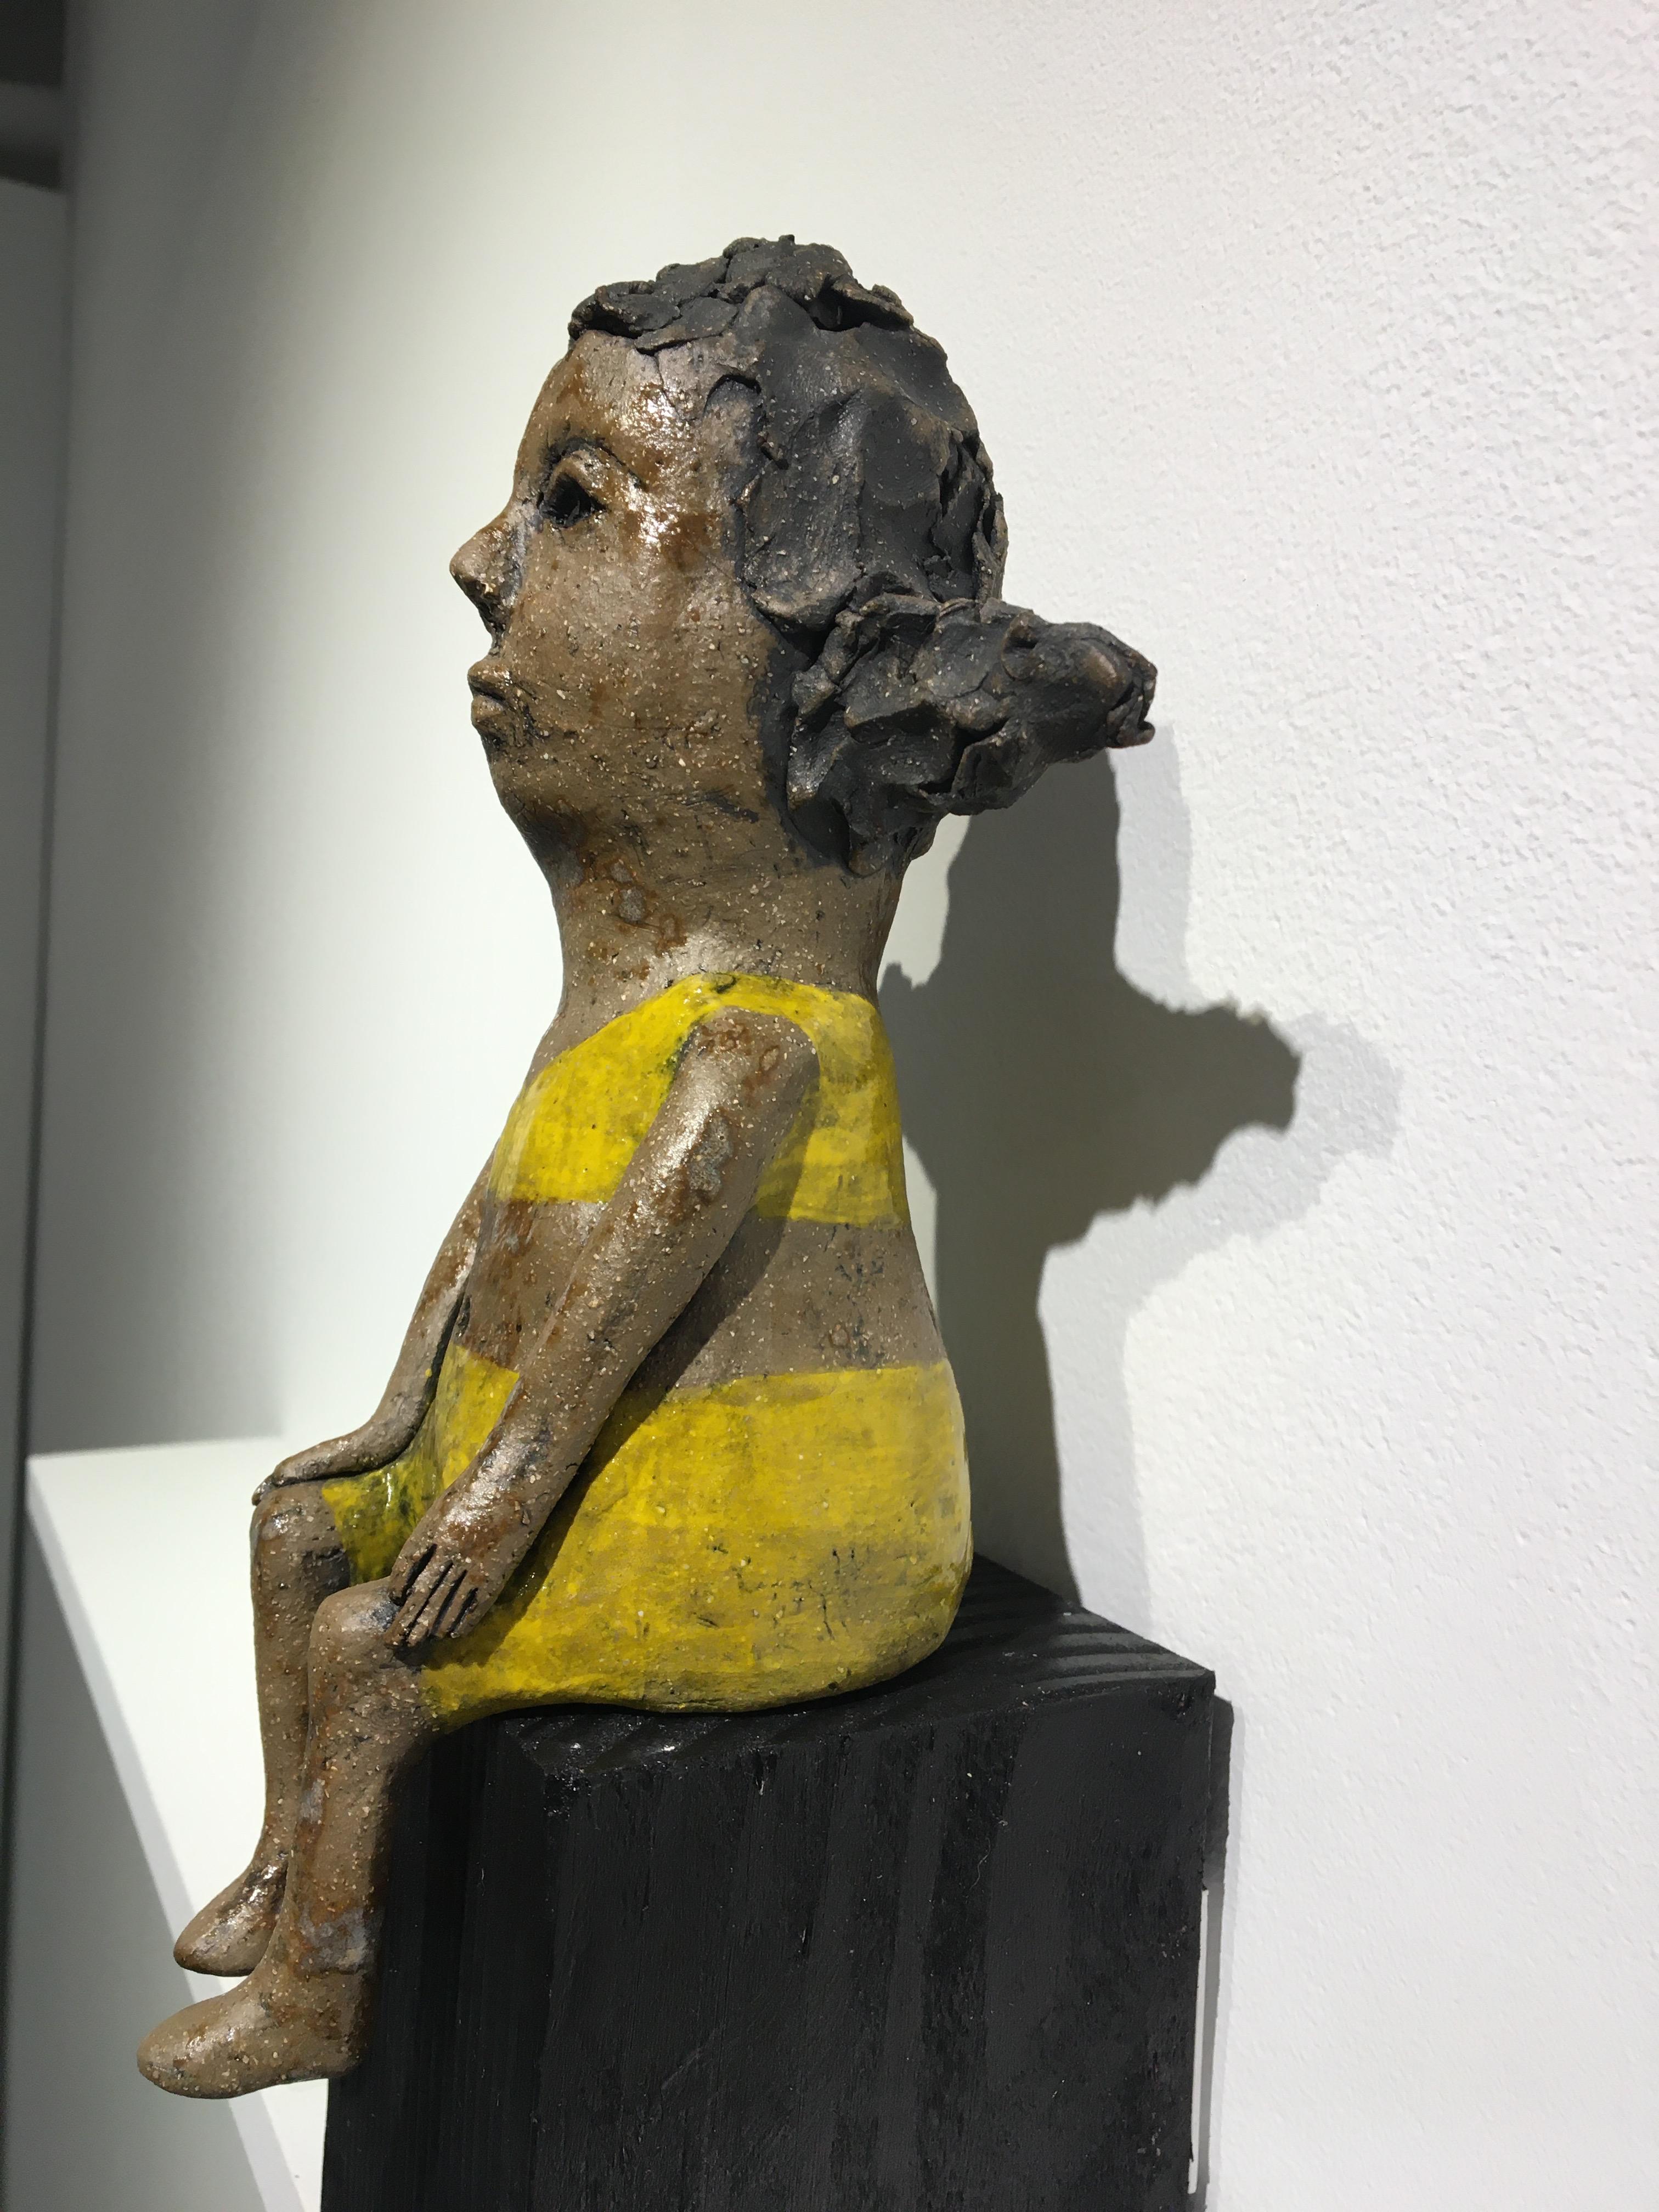 Ceramic figure on wood block: 'Hush up and hold me tight' - Brown Figurative Sculpture by Ashley Benton